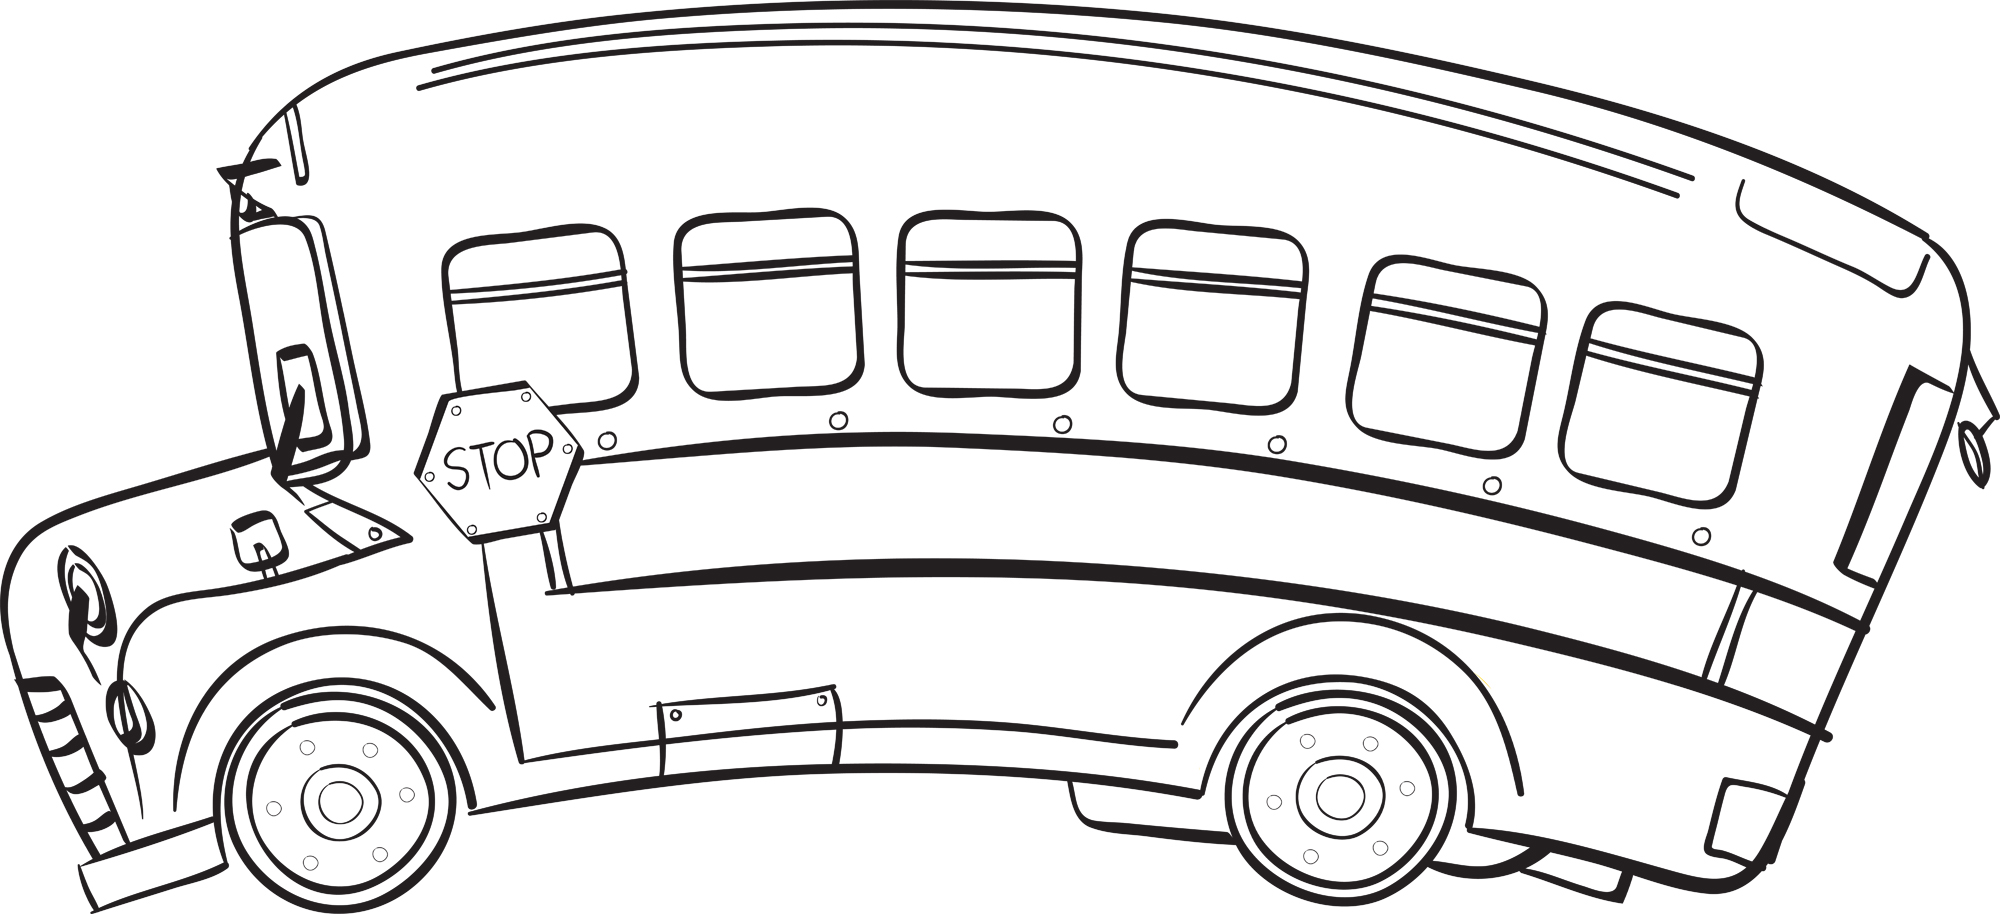 clipart school bus black and white - photo #12